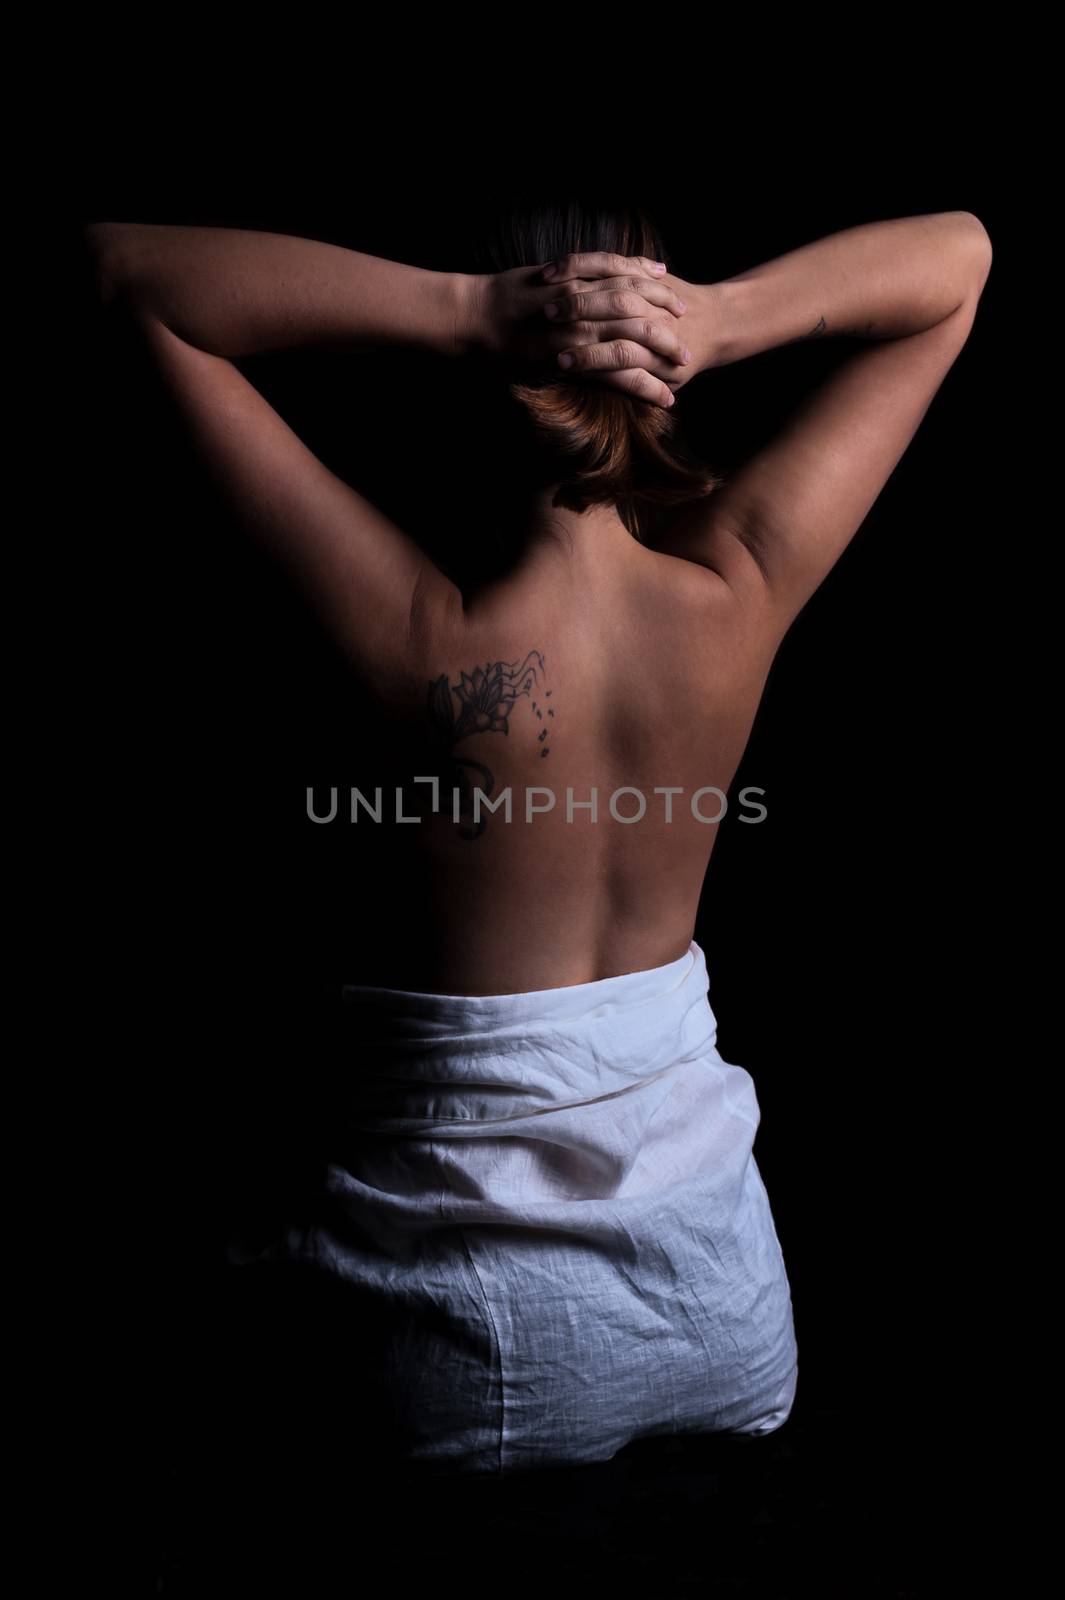 young girl with dark hair and a tattoo stands with naked back in the dark, holding her hands on her head